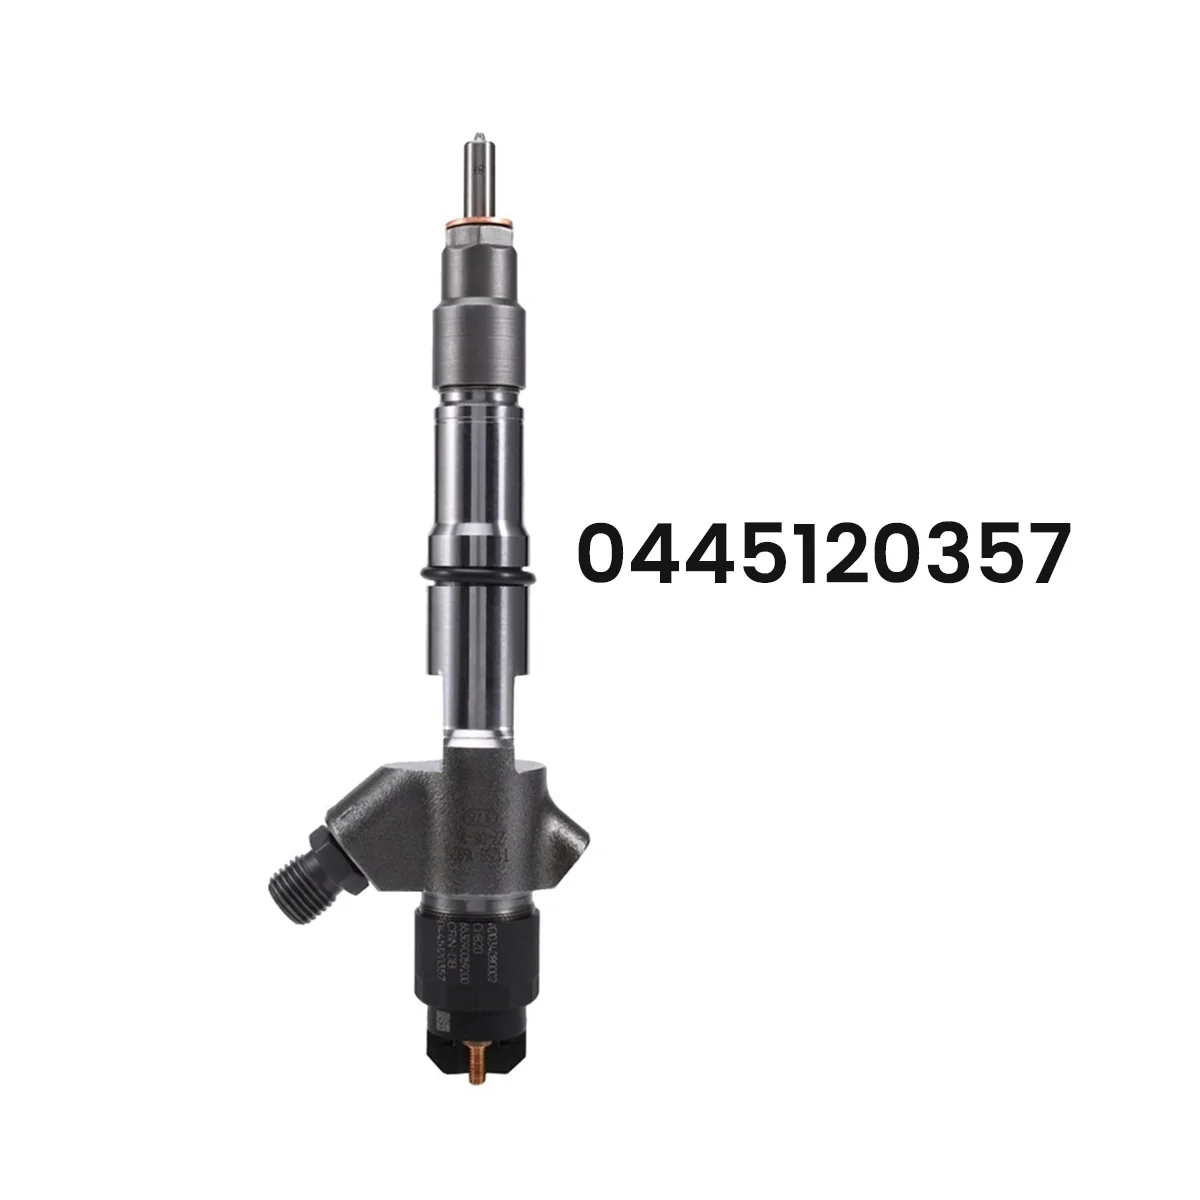 

0445120357 New Common Rail Crude Oil Fuel Injector Nozzle for Bosch for WEICAI WD615 Sino Truck HOWO Engine